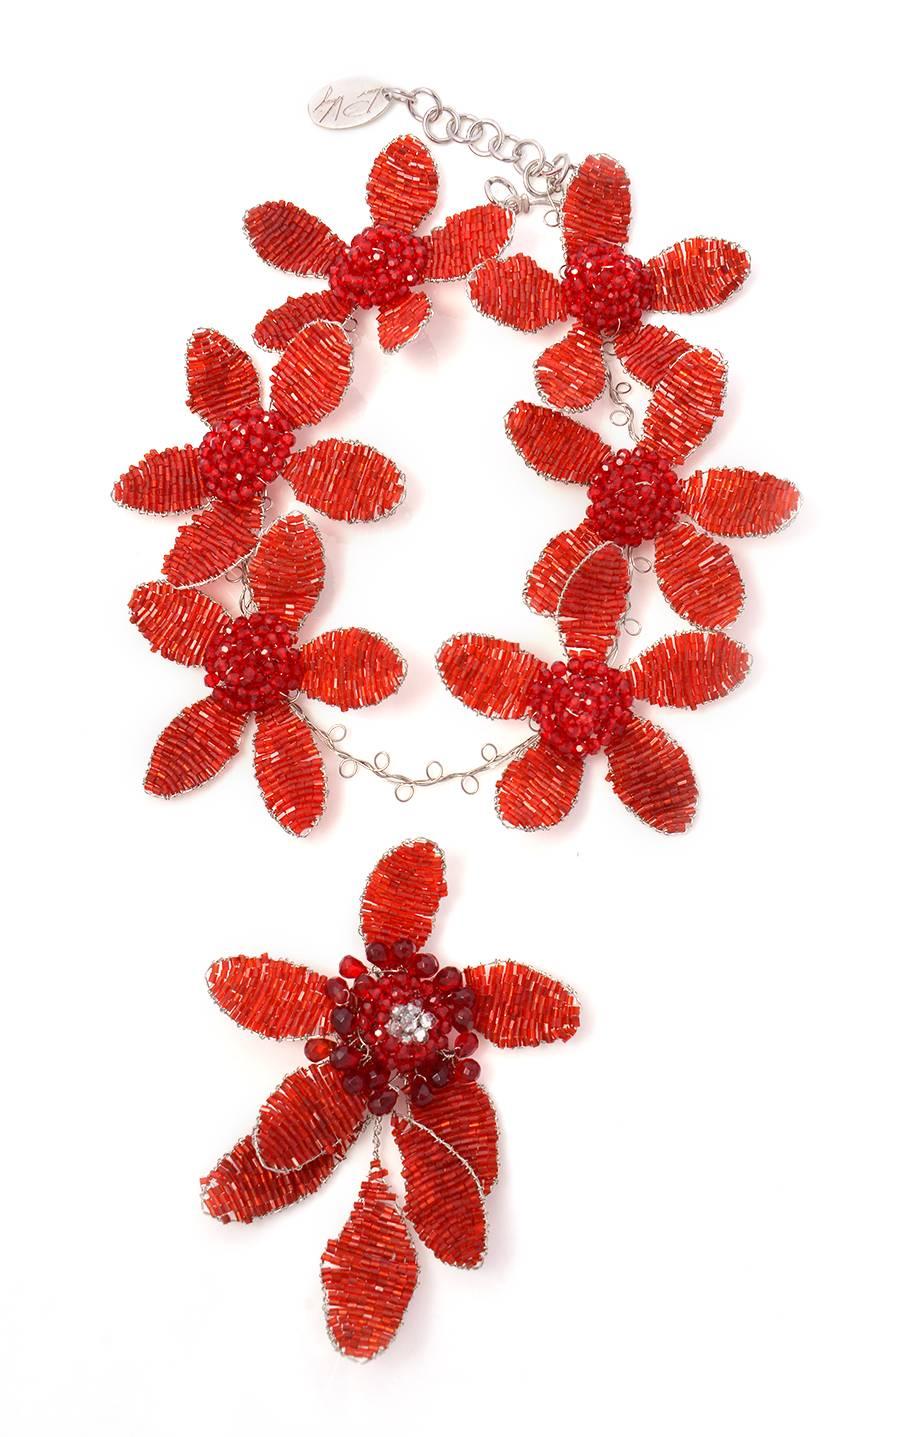 
From the Estate of Joan Rivers. Hand crafted by Joe Vilaiwan, this red bugle beaded floral necklace has six five-petaled flowers, each with a domed multifaceted bead center, plus a brooch that can be removed from the necklace as a seventh flower.